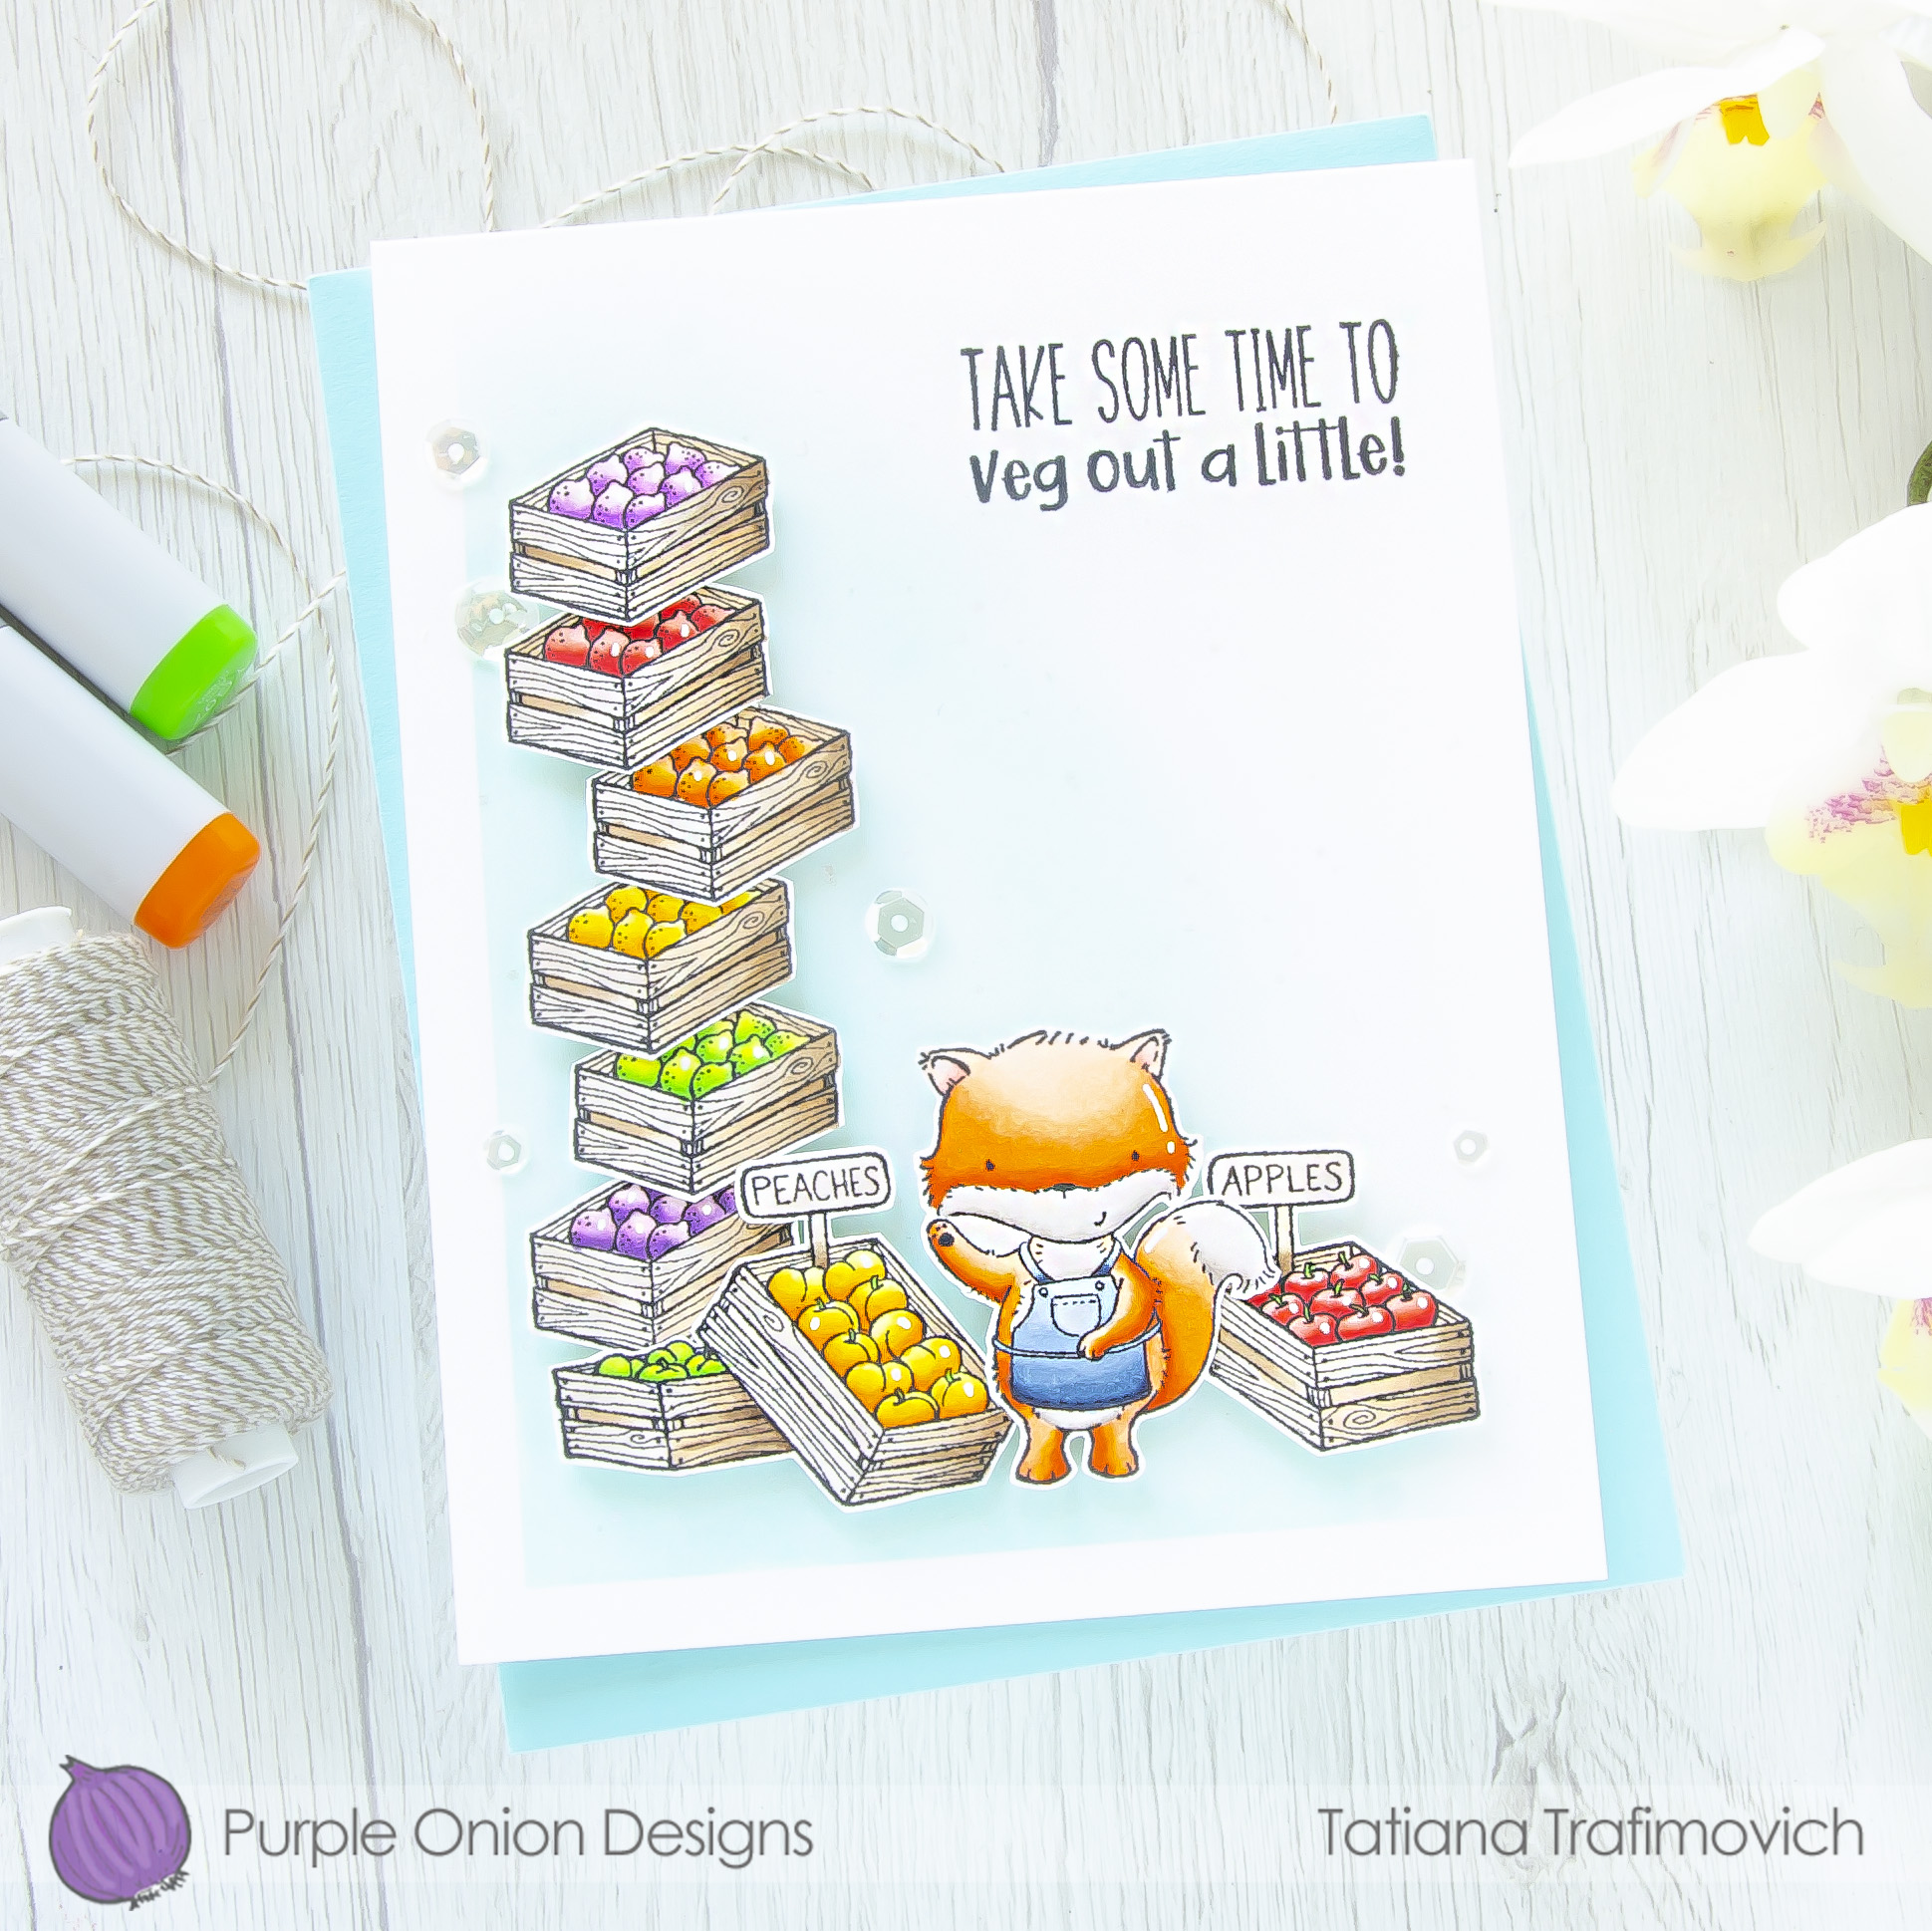 Take Some Time To Veg Out A Little #handmade card by Tatiana Trafimovich #tatianacraftandart - stamps by Purple Onion Designs